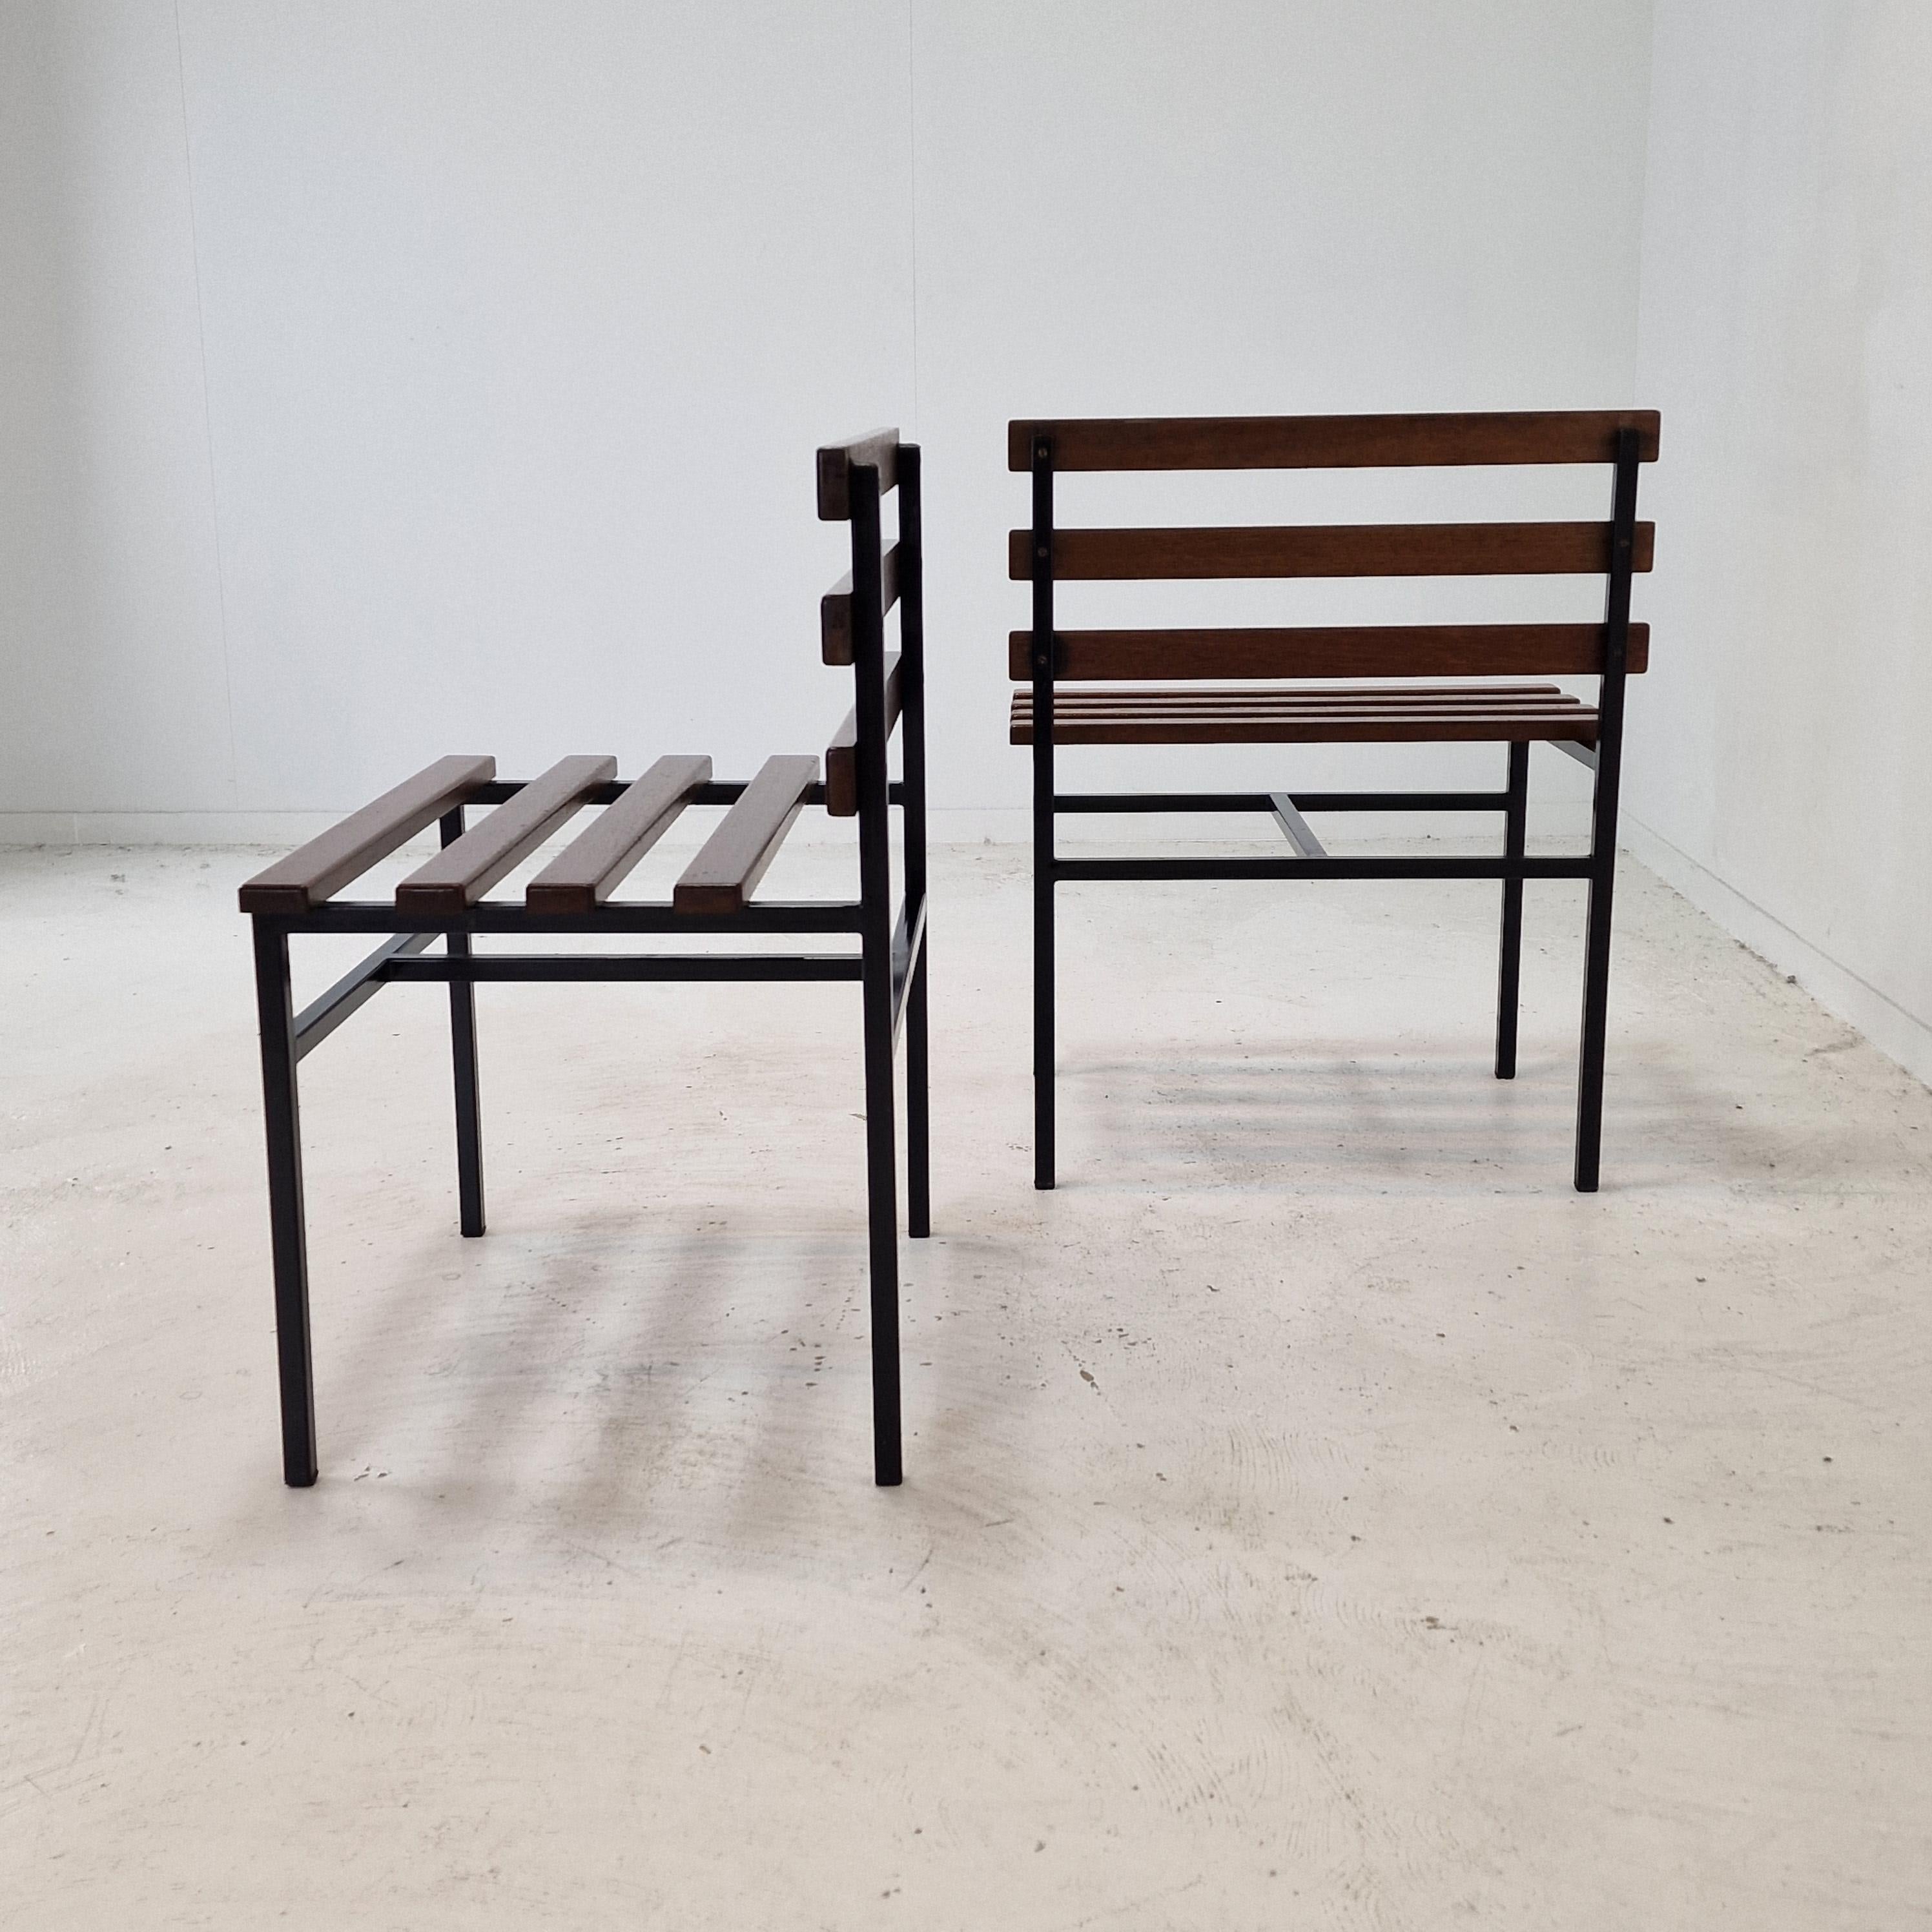 Midcentury Set of 2 Chairs or Benches in Teak, Italy, 1960s For Sale 3